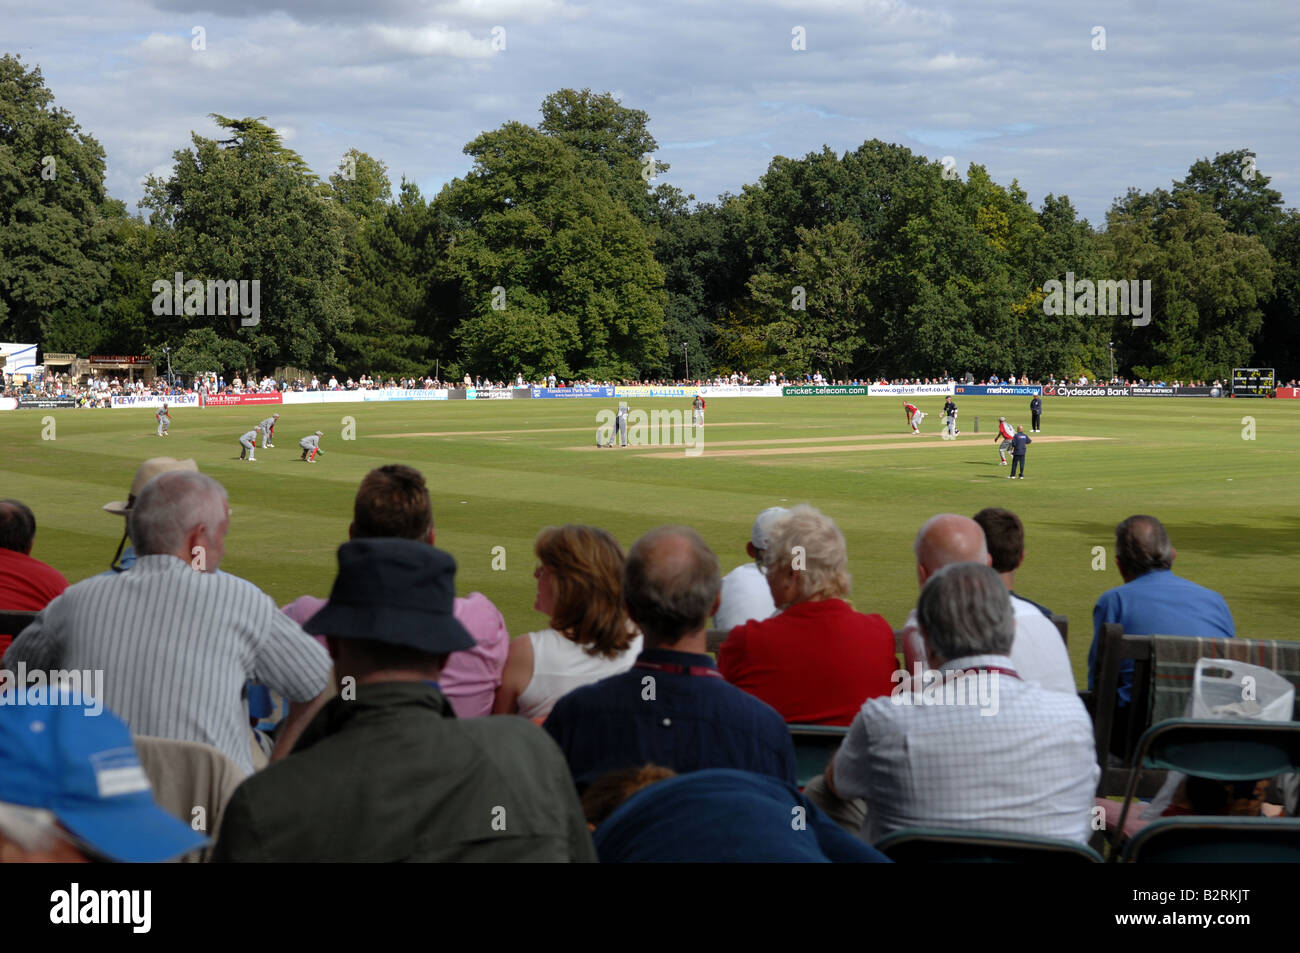 Spectators watch a cricket match between Sussex and Somerset at the Arundel Castle ground UK Stock Photo